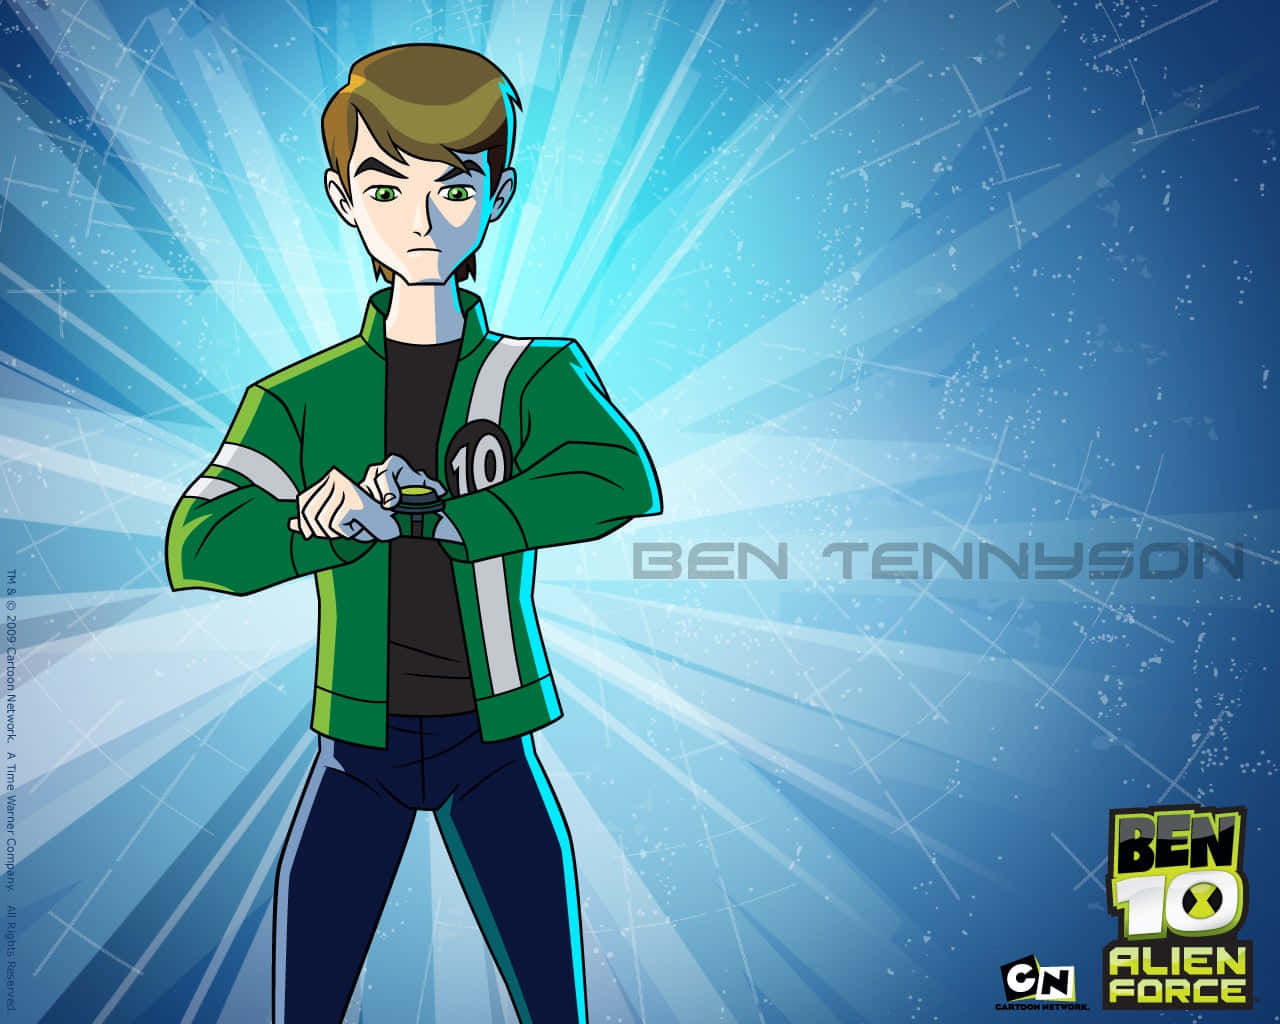 Ben 10 using his powers to bravely protect Earth